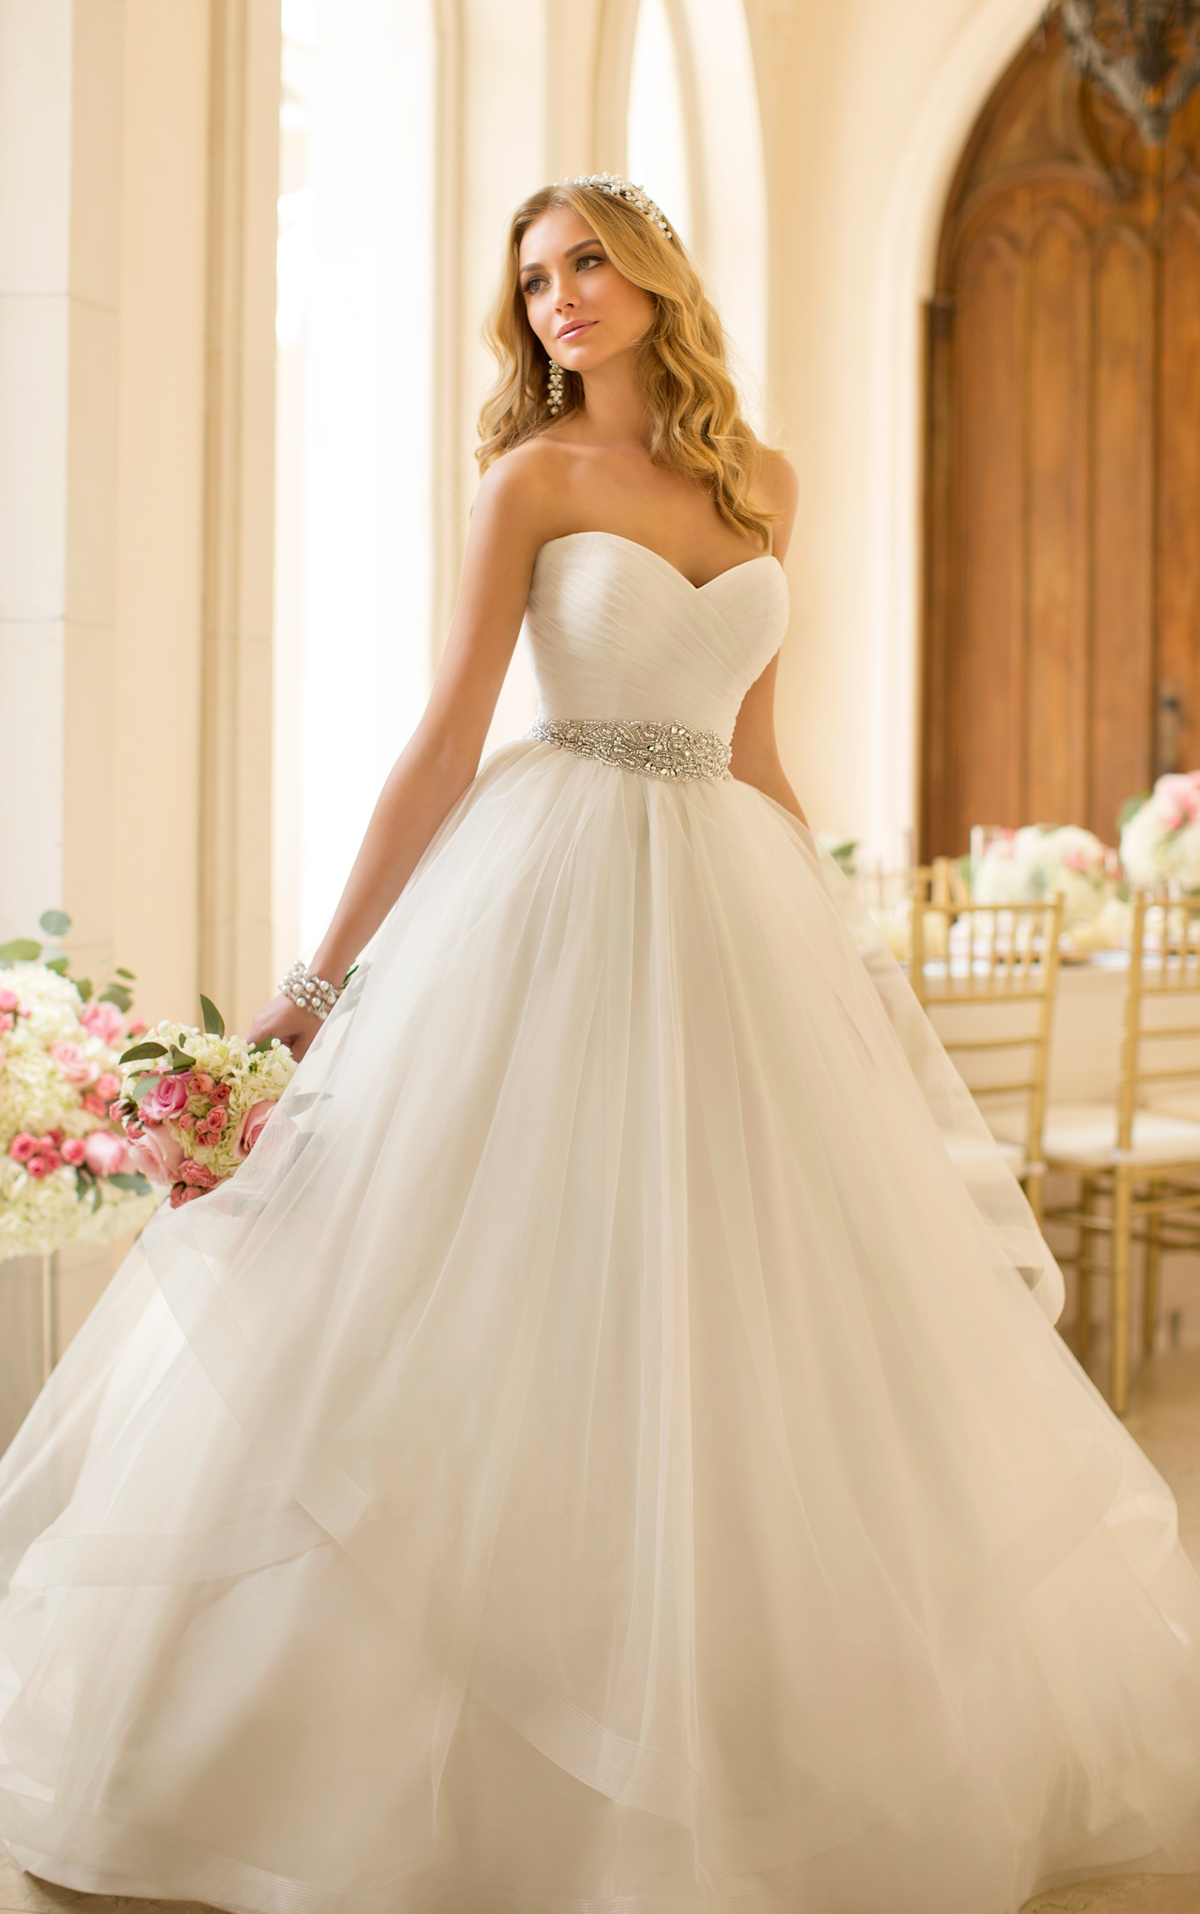 Great wedding gowns